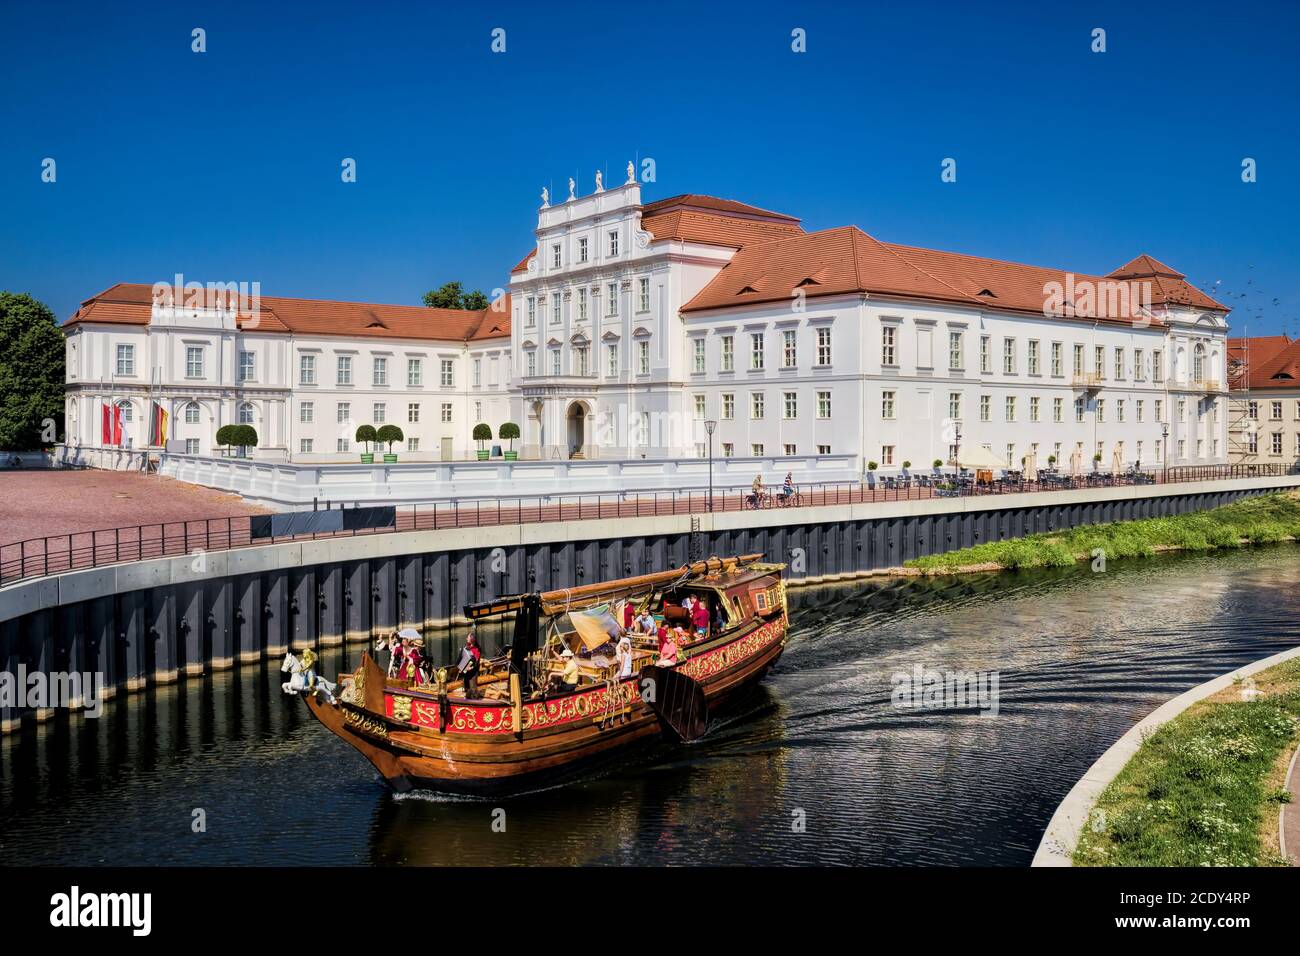 Havel canal at Oranienburg castle, Germany Stock Photo